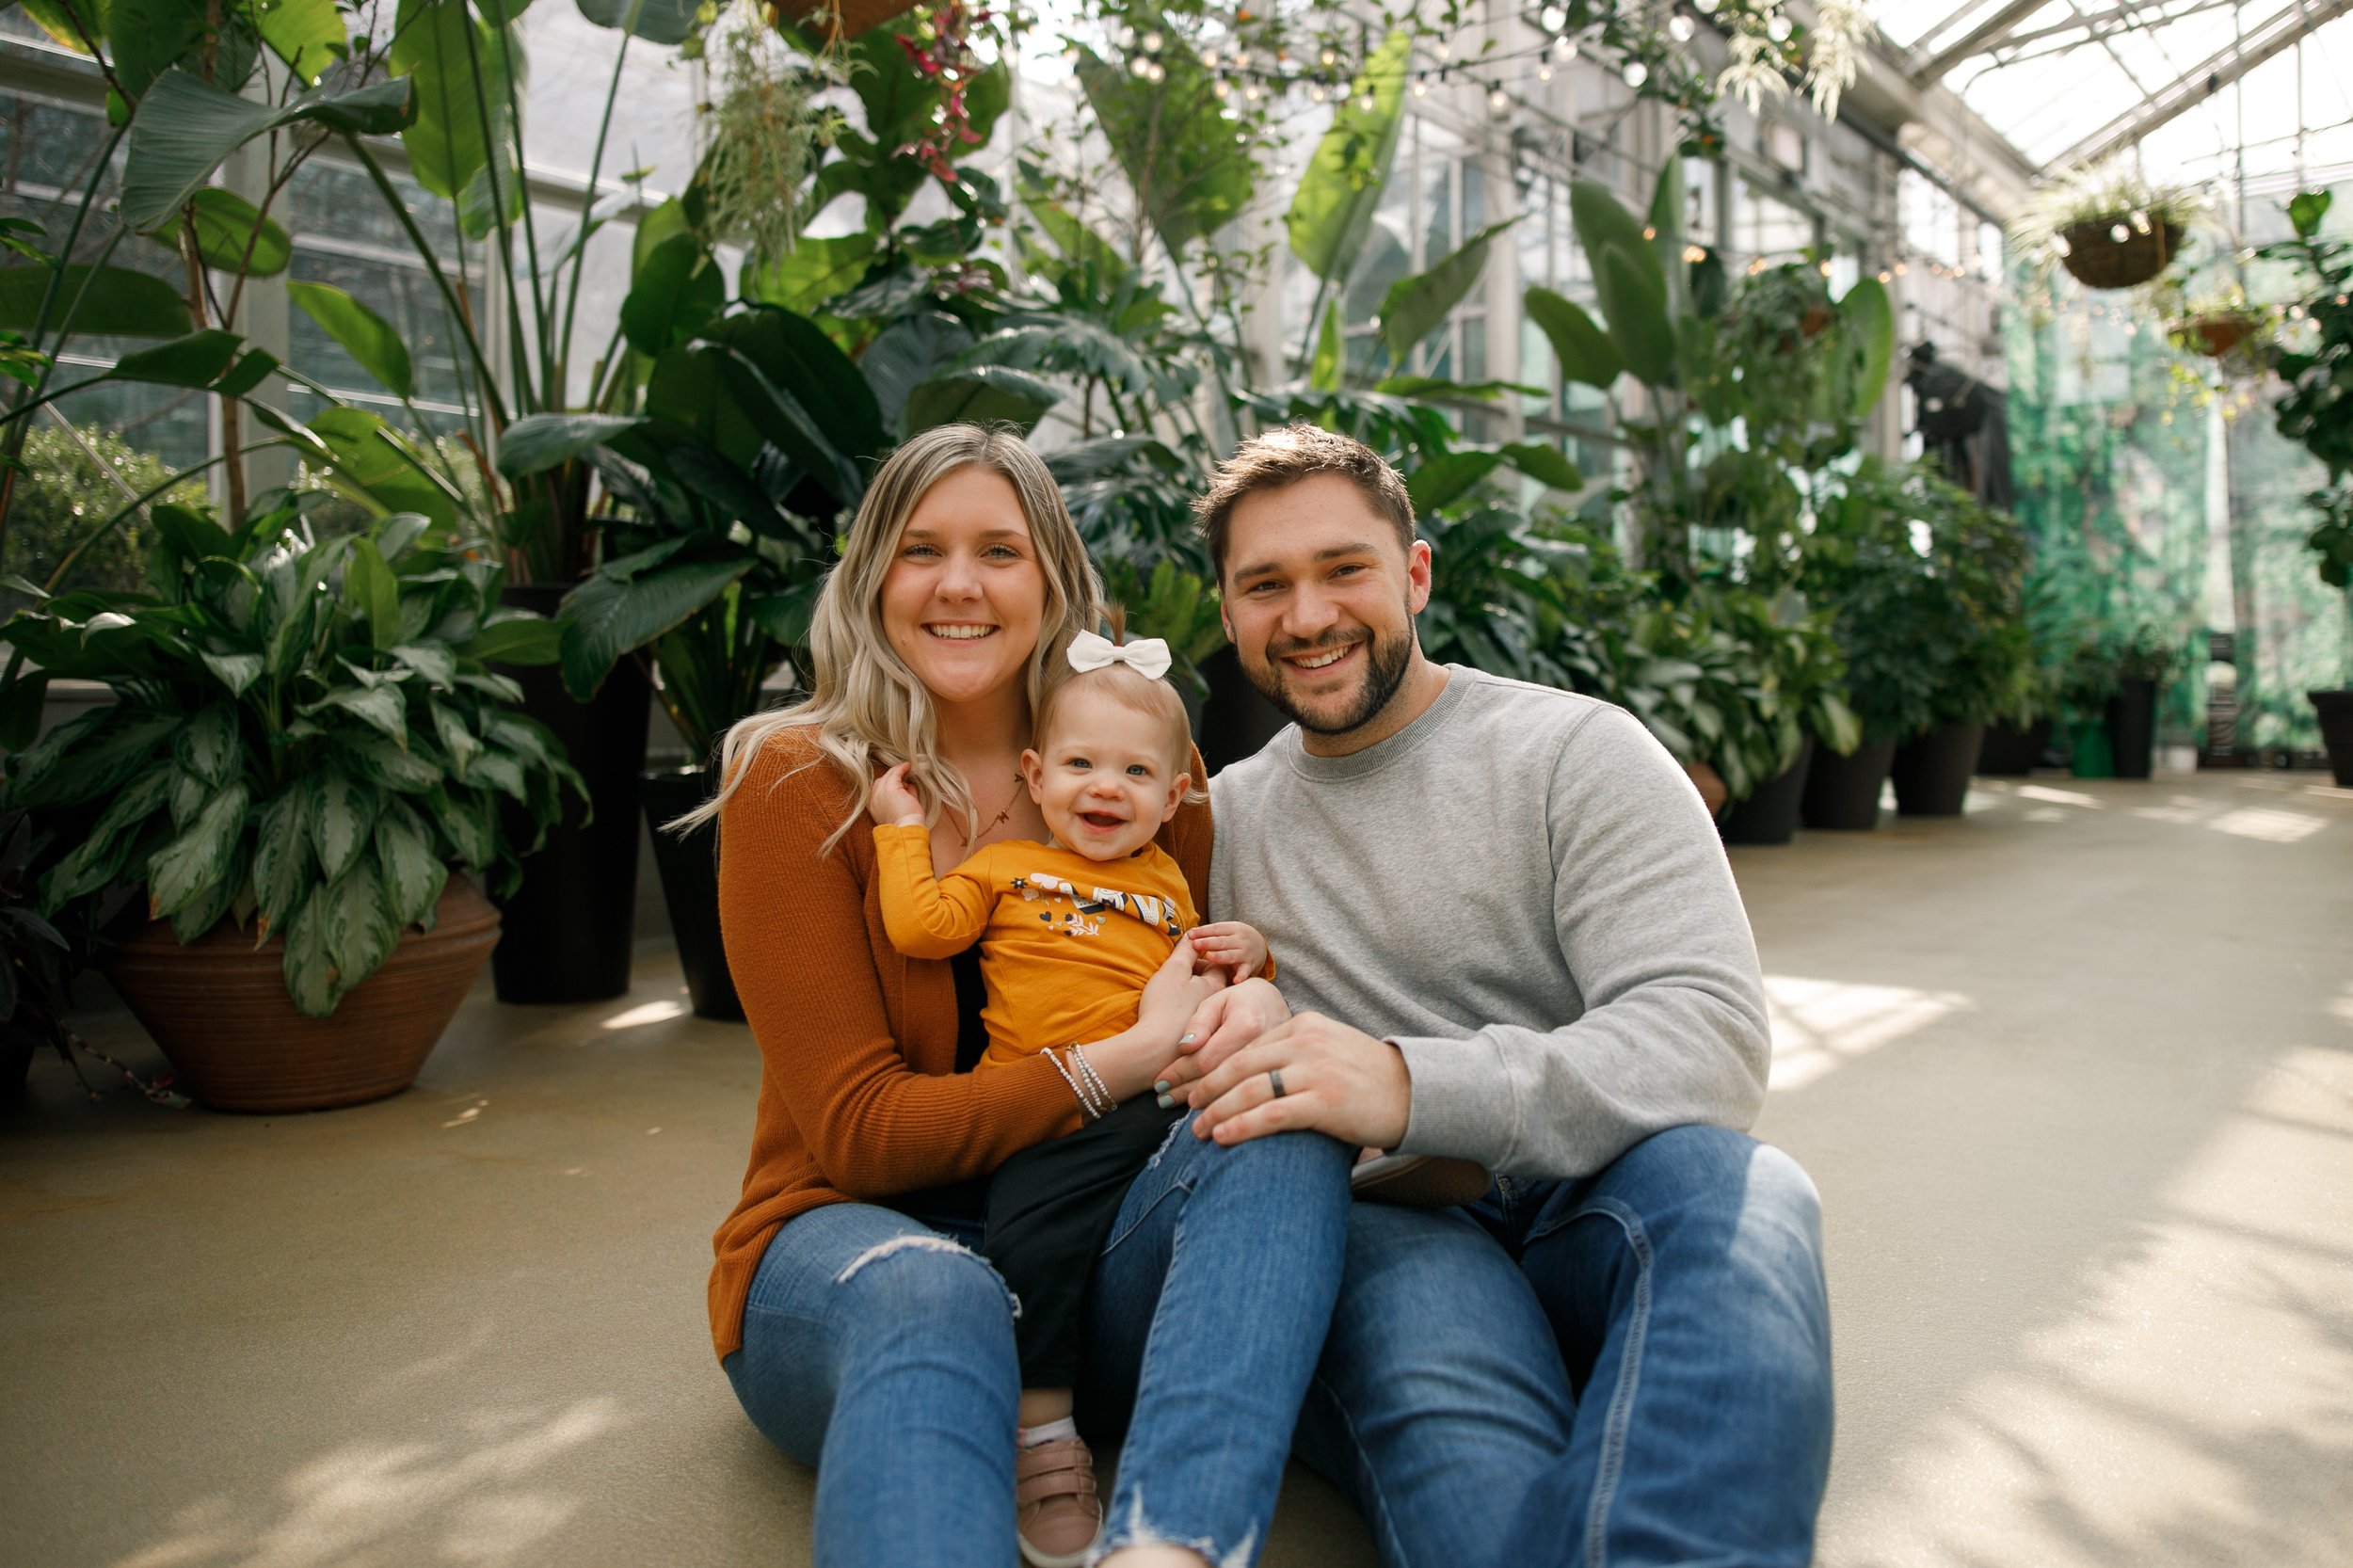 Downtown Market Greenhouse - Grand Rapids Family Photographer - Greenhouse Family Session - Downtown Market Grand Rapids - Vachon Family - J Darling Photo06.jpg